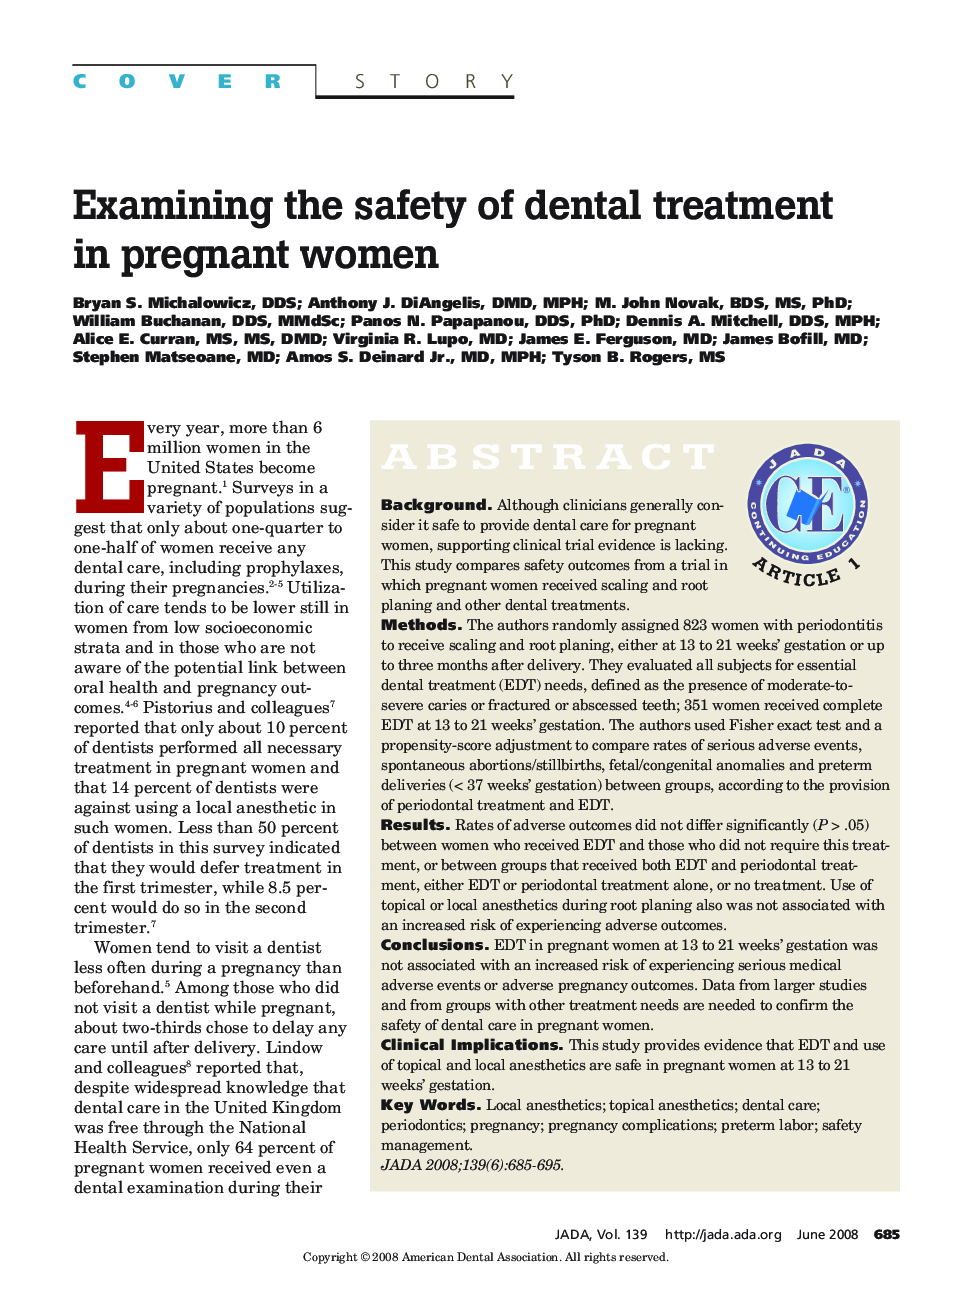 Examining the Safety of Dental Treatment in Pregnant Women 